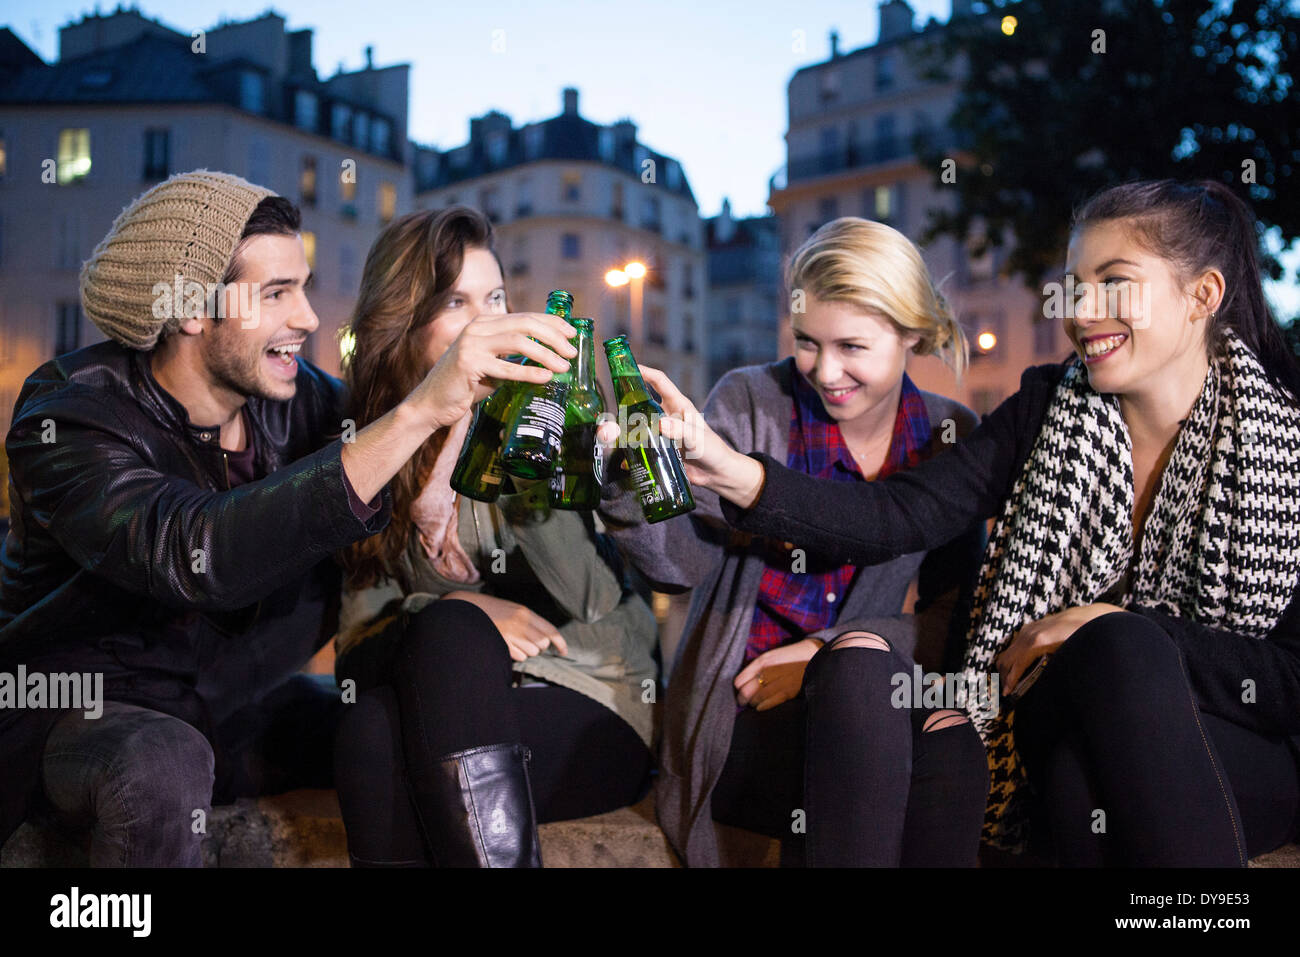 Friends celebrating together outdoors Stock Photo